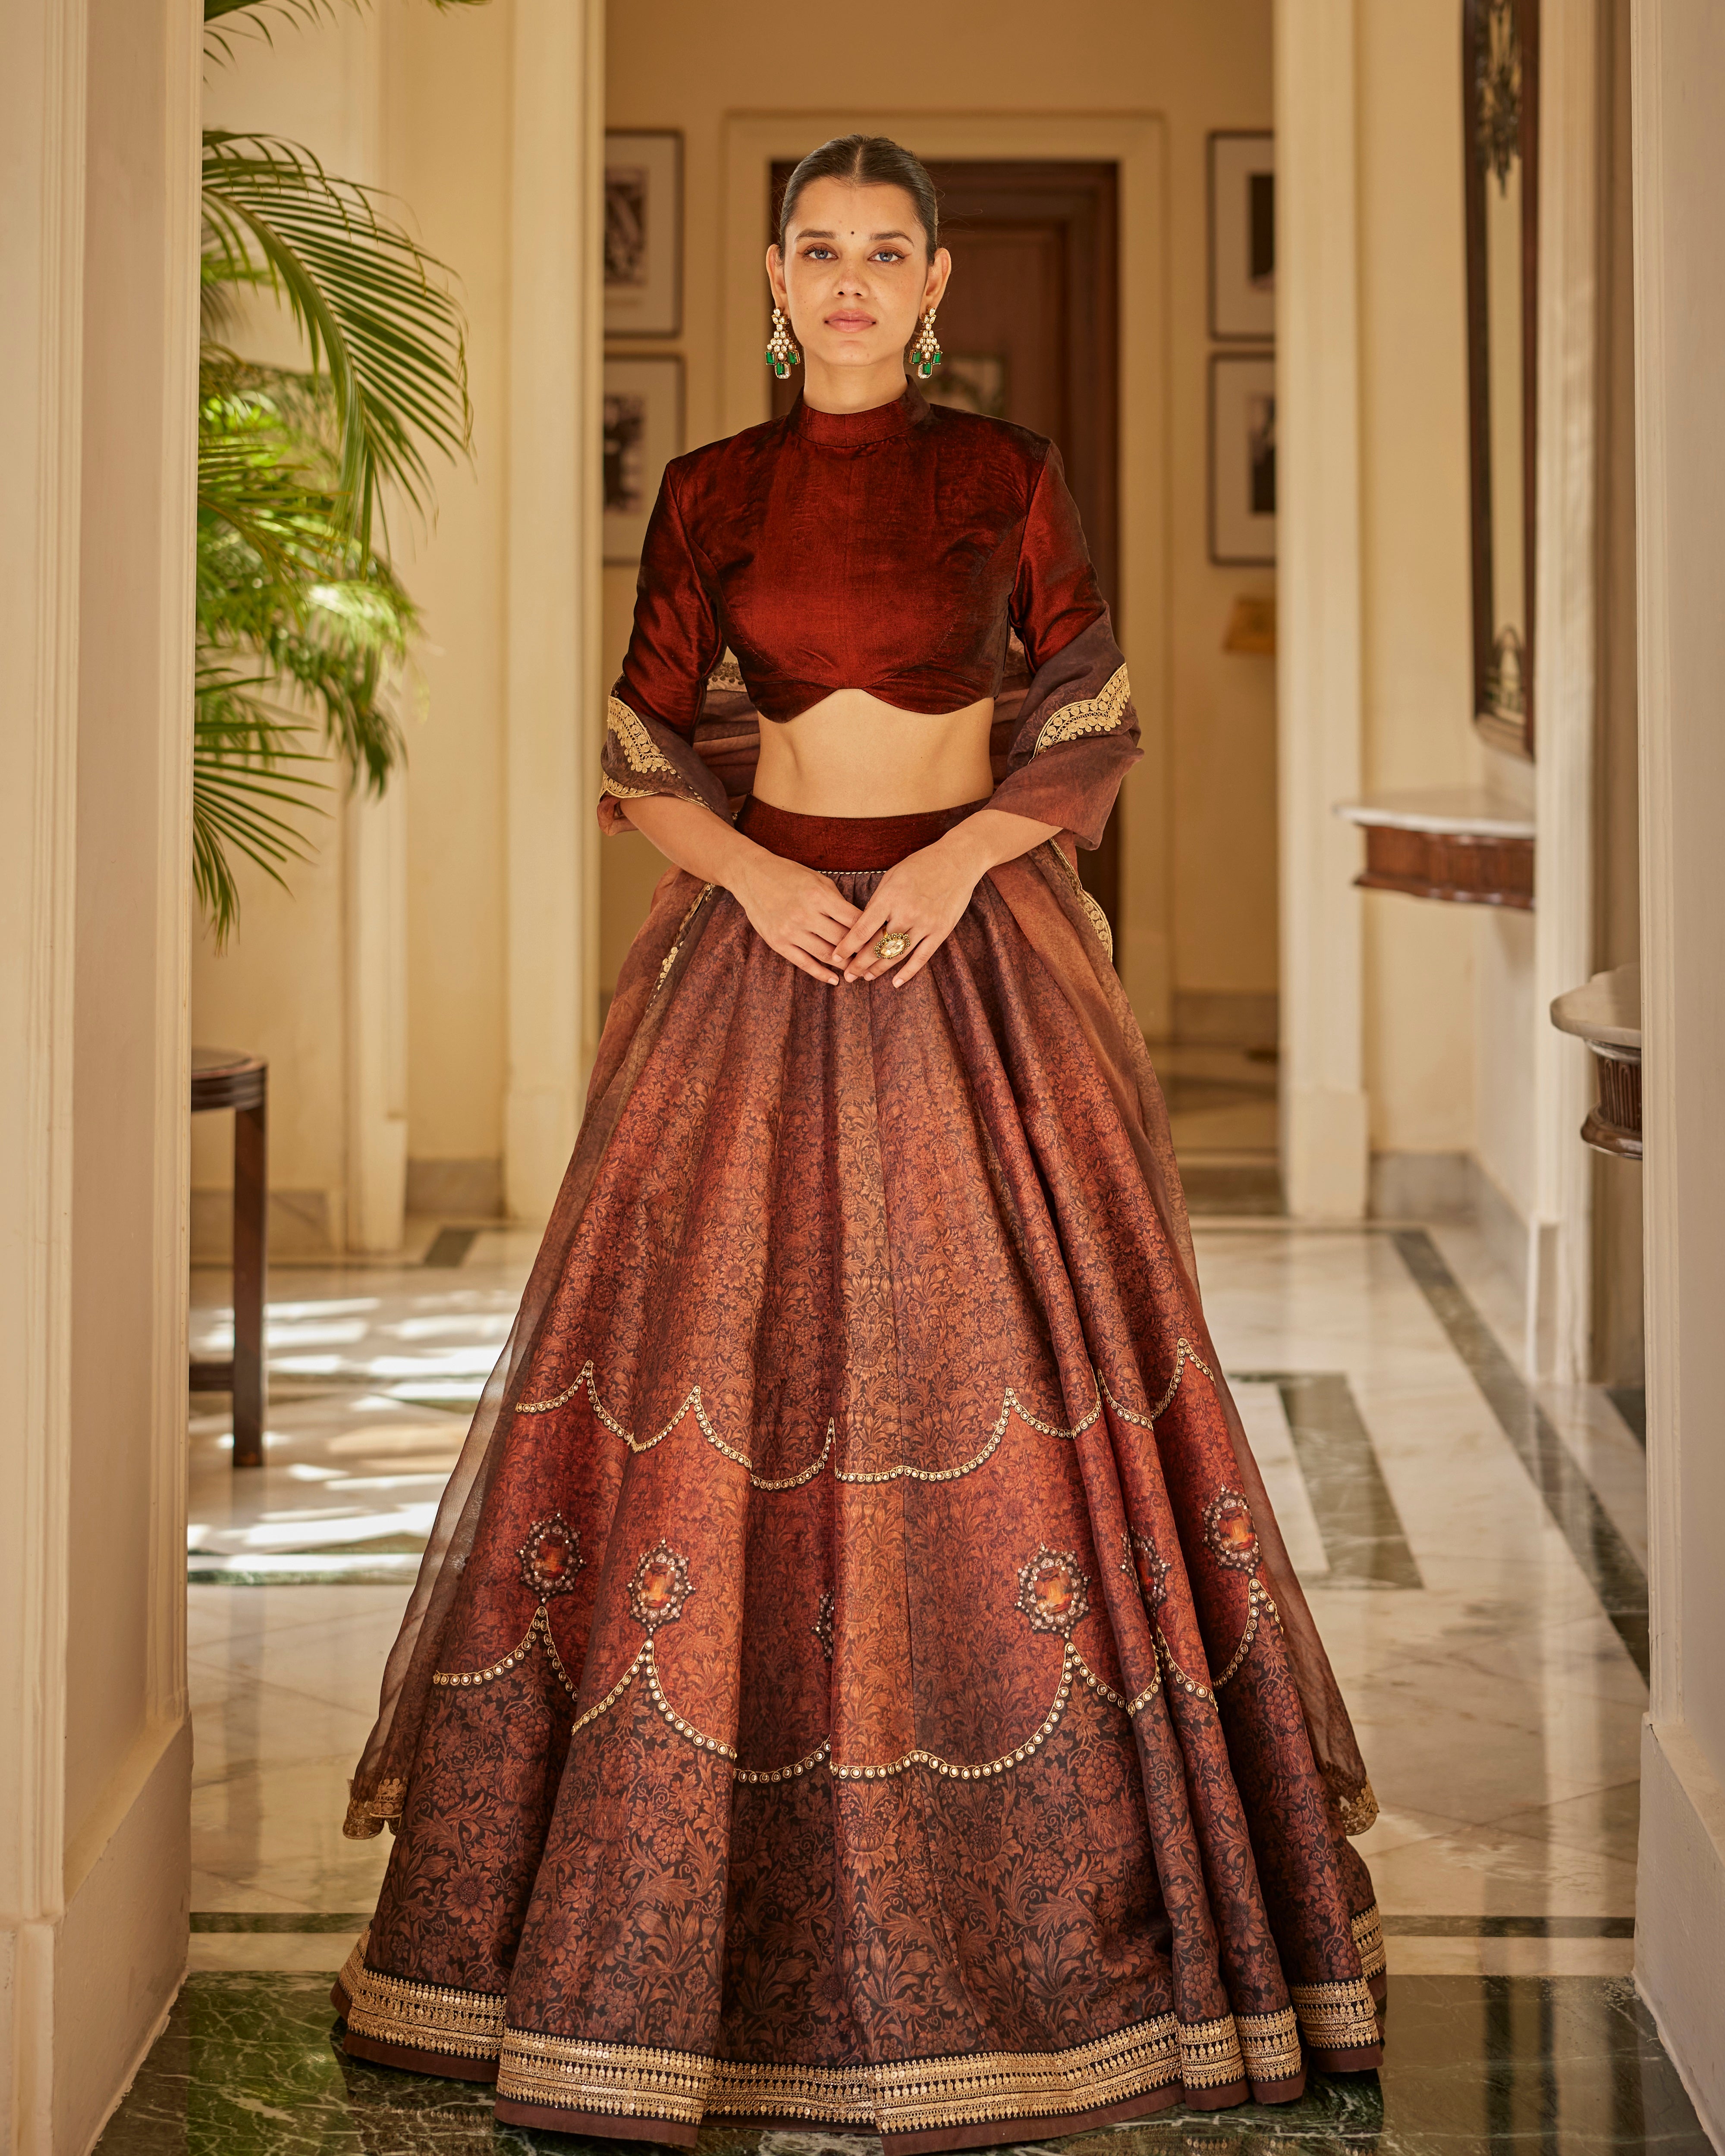 21 Latest Lehenga Designs For Festivals And Weddings - Stylebees.com |  Indian fashion, Indian outfits, Indian dresses